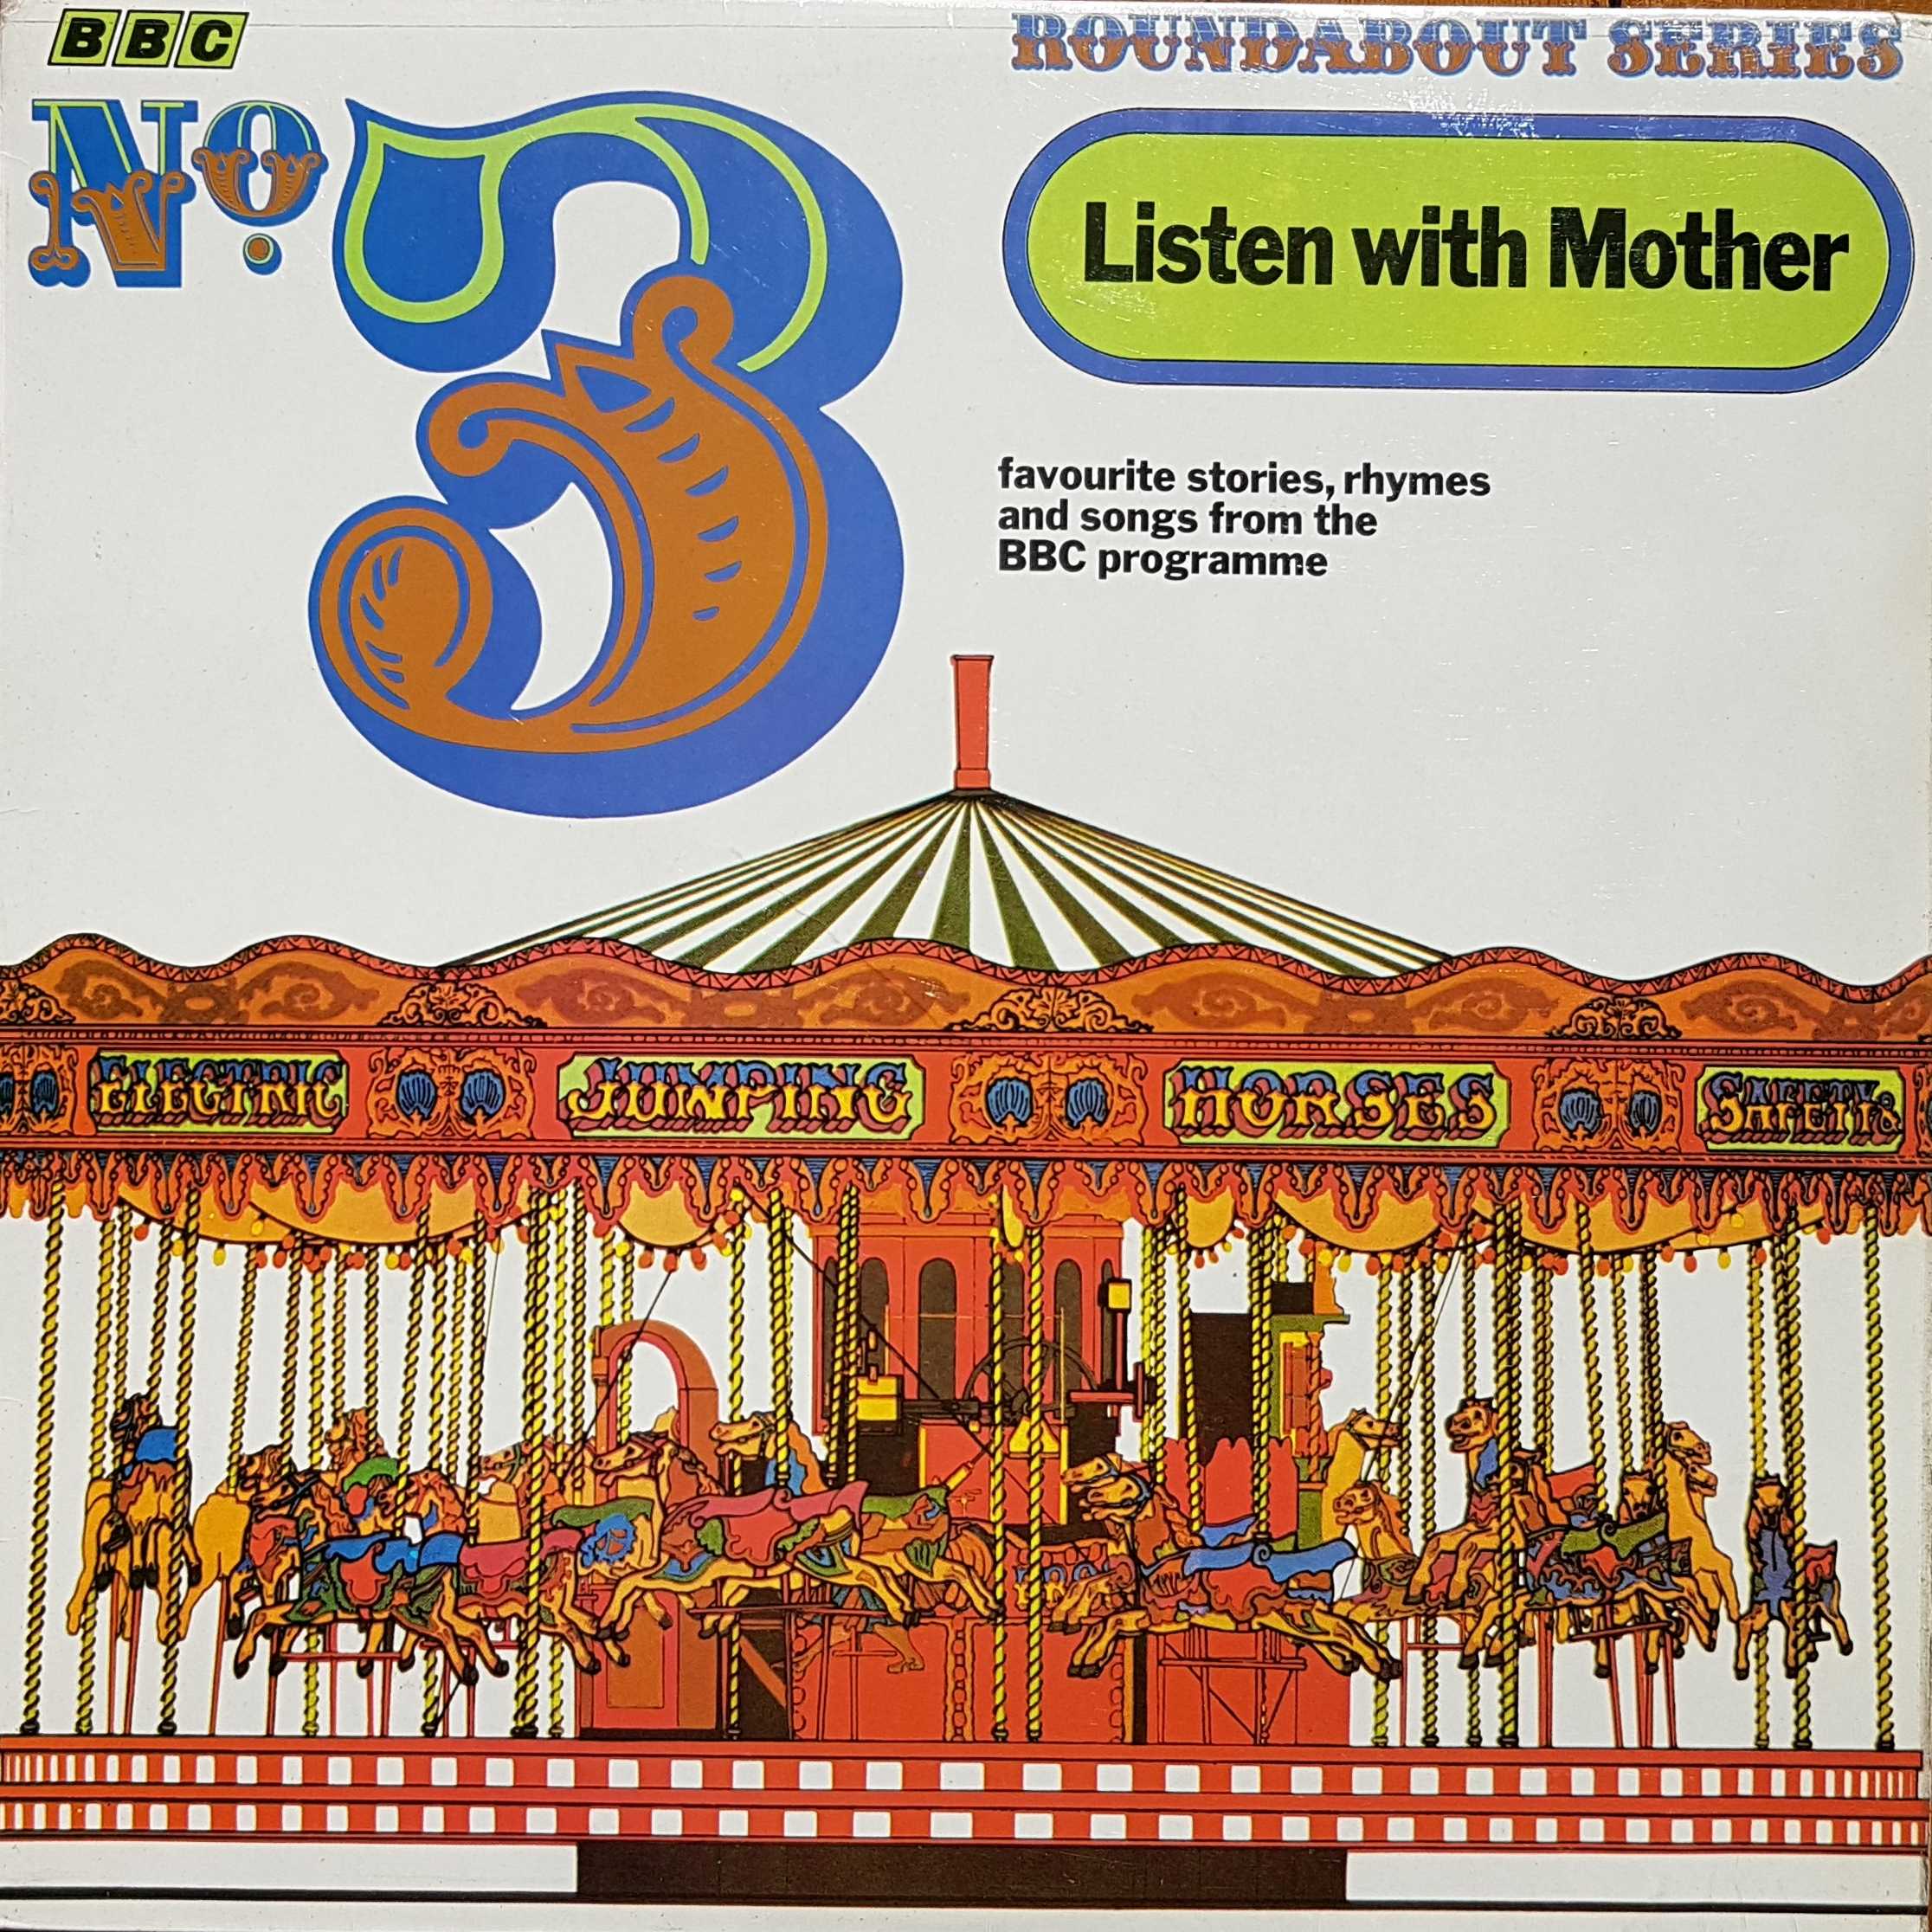 Picture of RBT 3 Listen with mother by artist Various from the BBC albums - Records and Tapes library